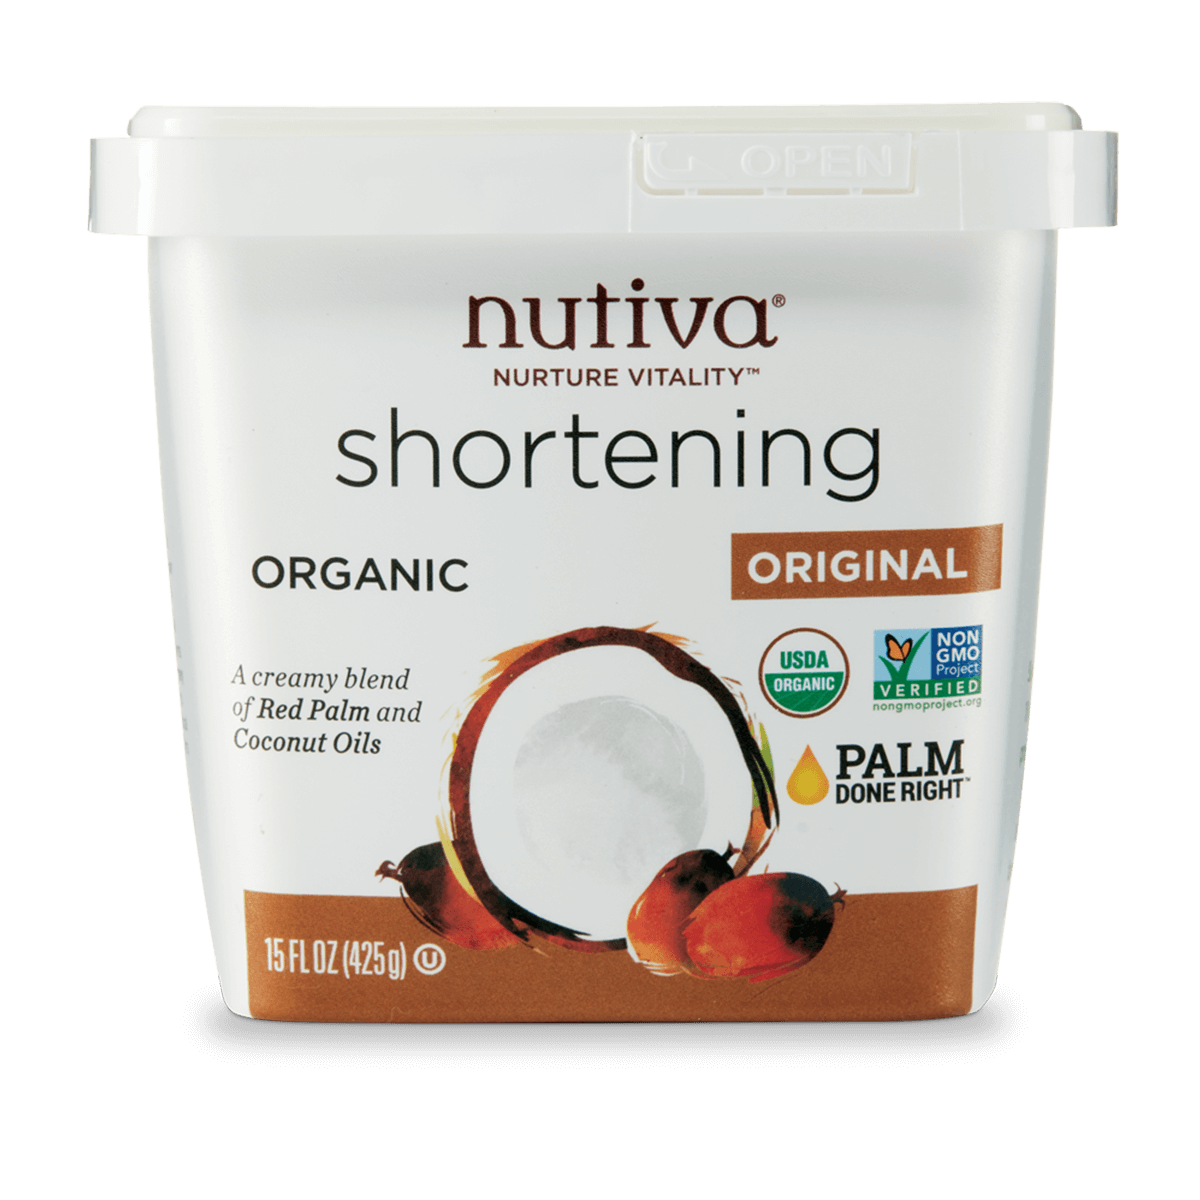 Has anyone ever used Nutiva palm shortening in their soap